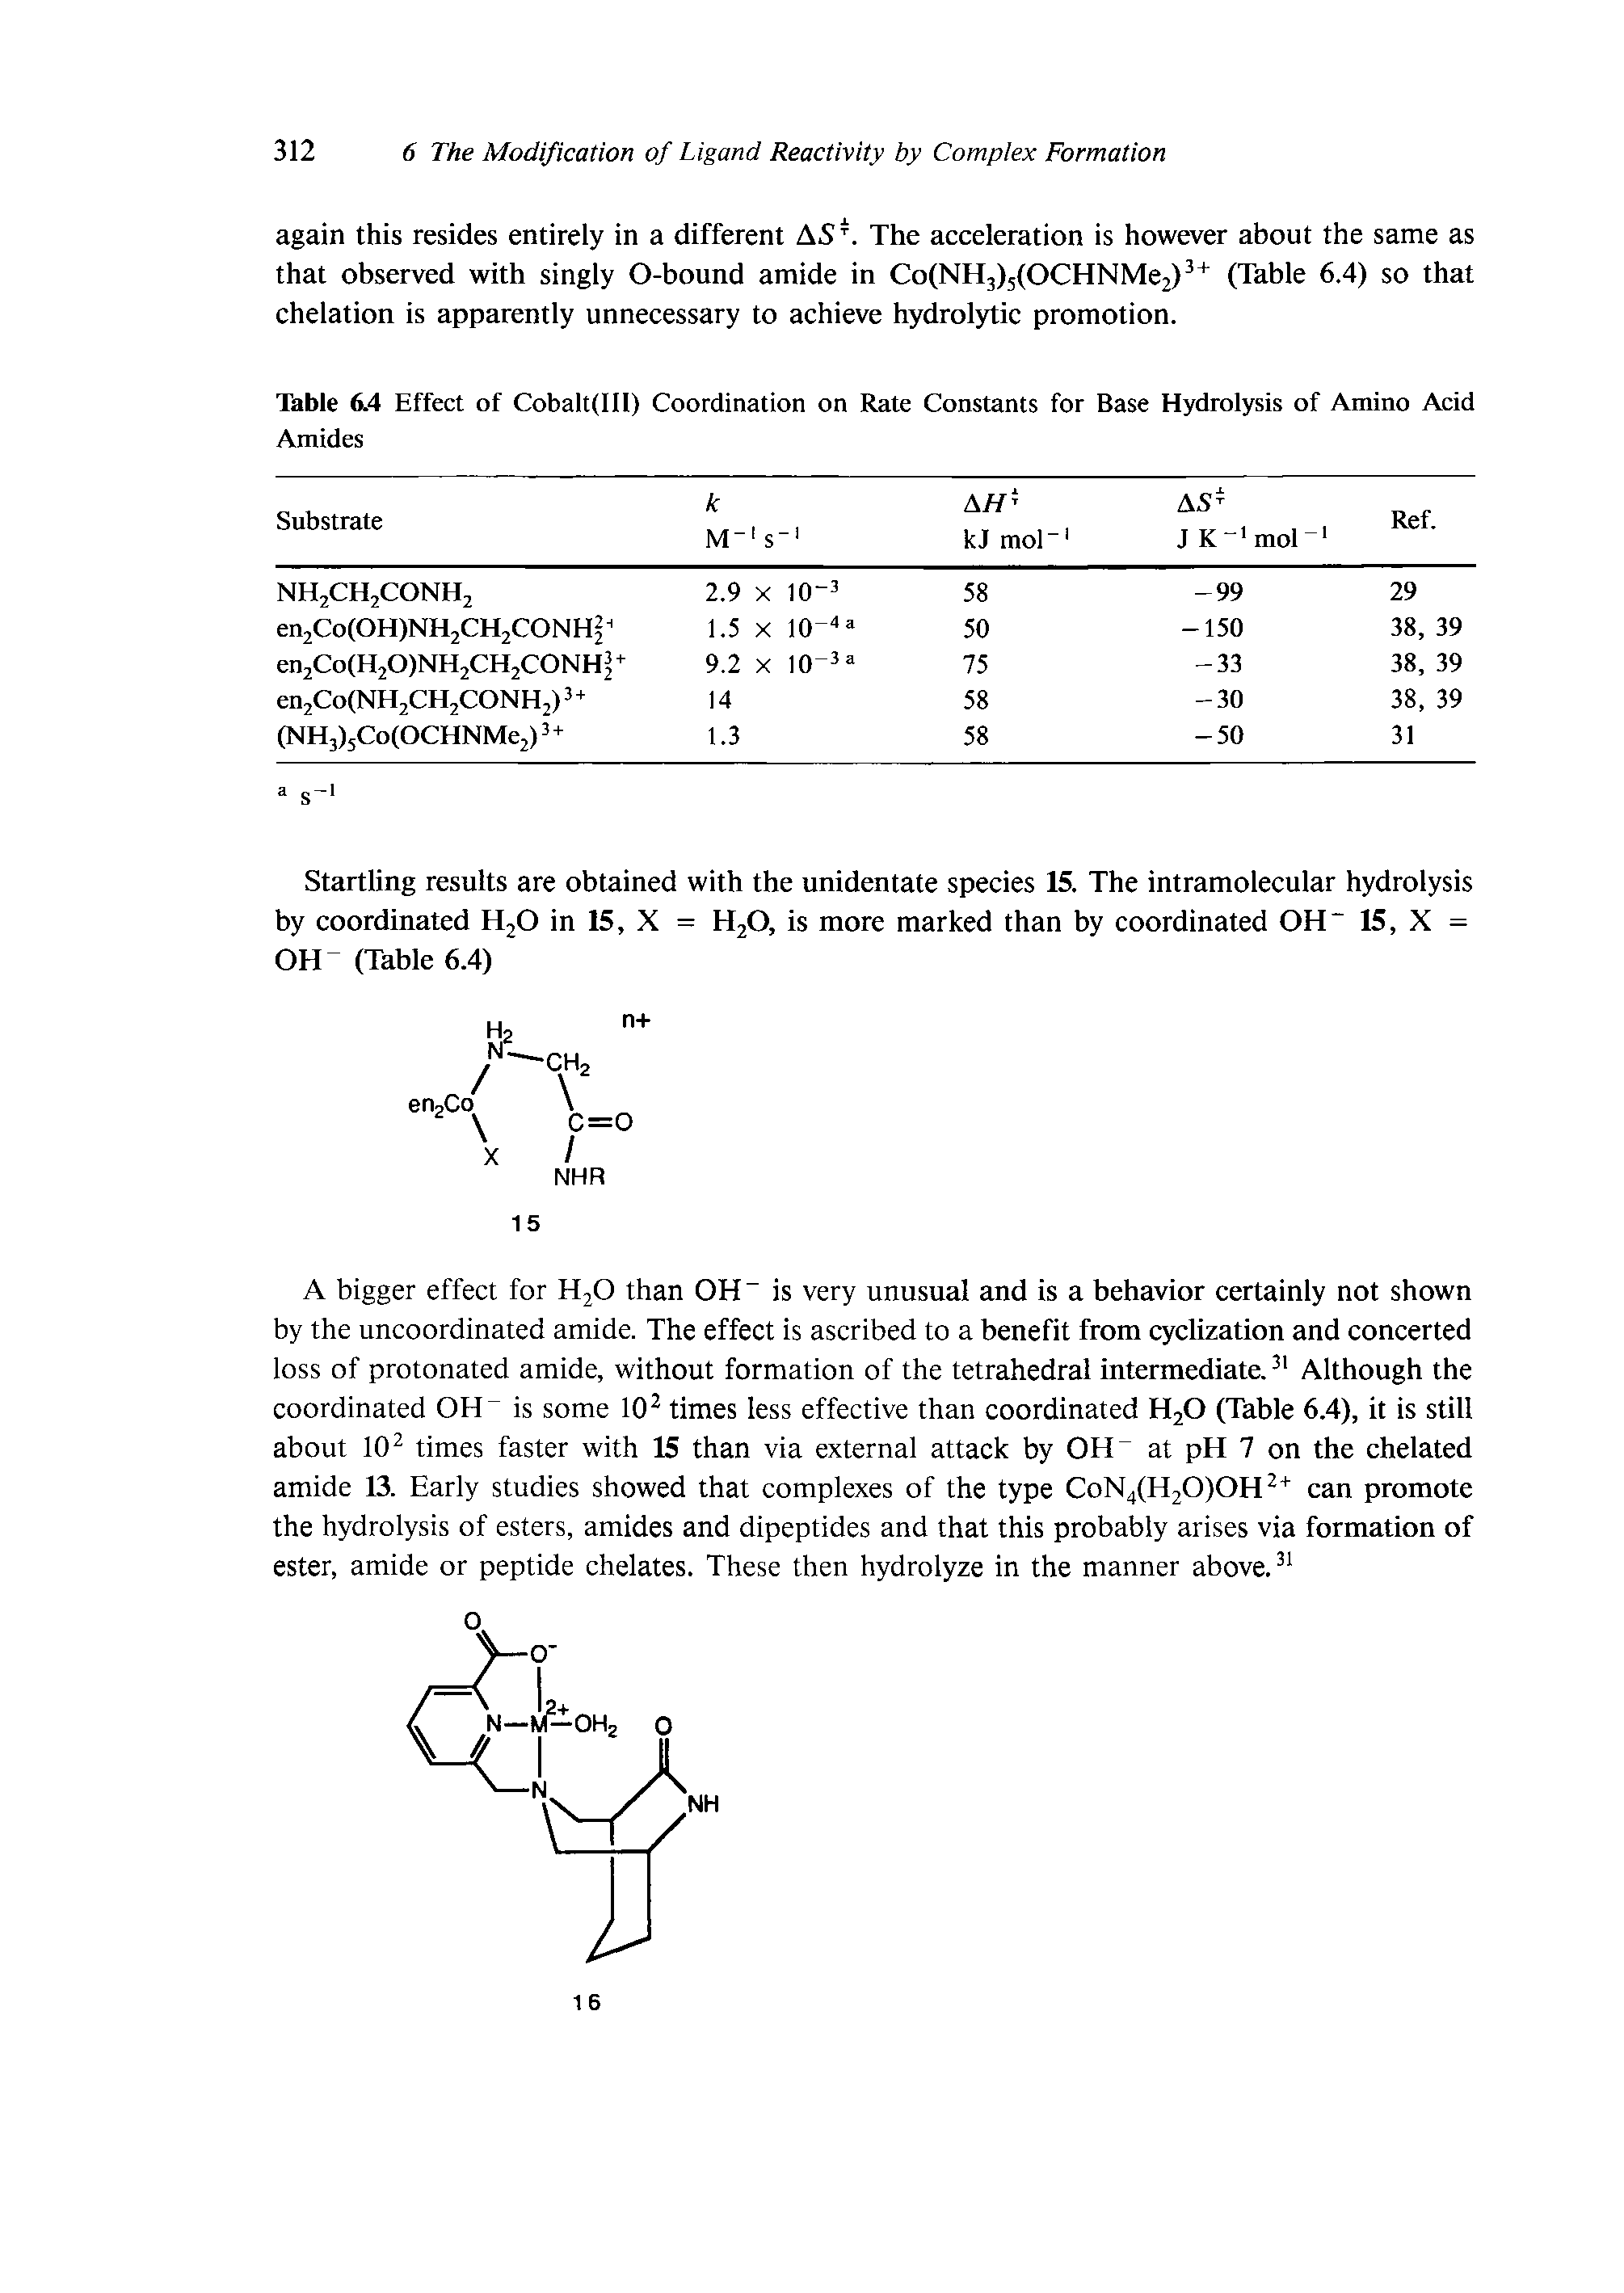 Table 6w4 Effect of Cobalt(lll) Coordination on Rate Constants for Base Hydrolysis of Amino Acid Amides...